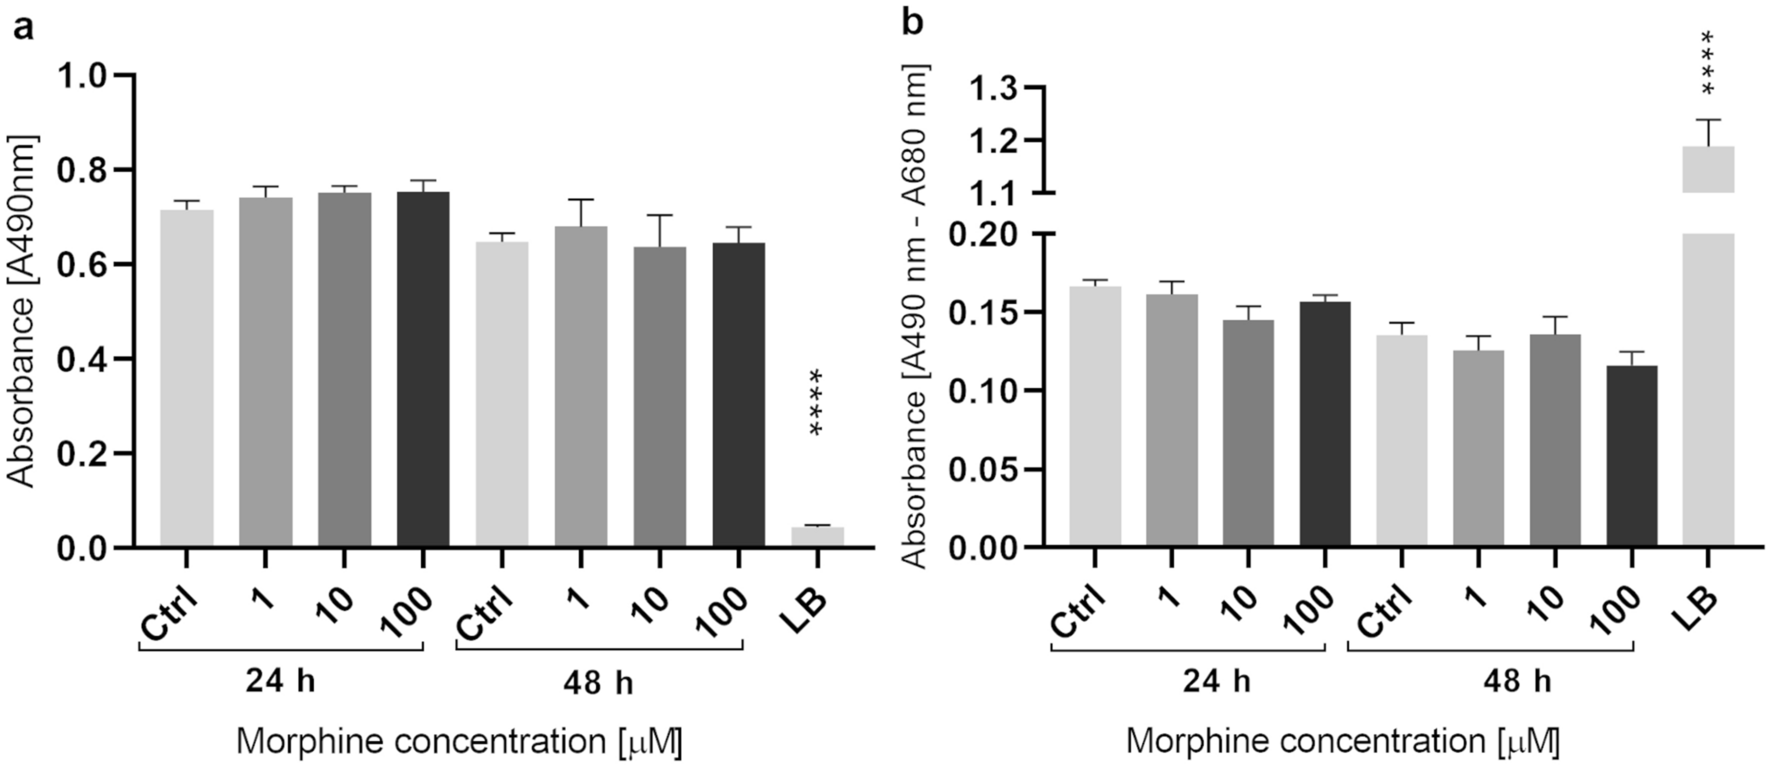 Morphine-induced modulation of Nrf2-antioxidant response element signaling pathway in primary human endothelial | Reports